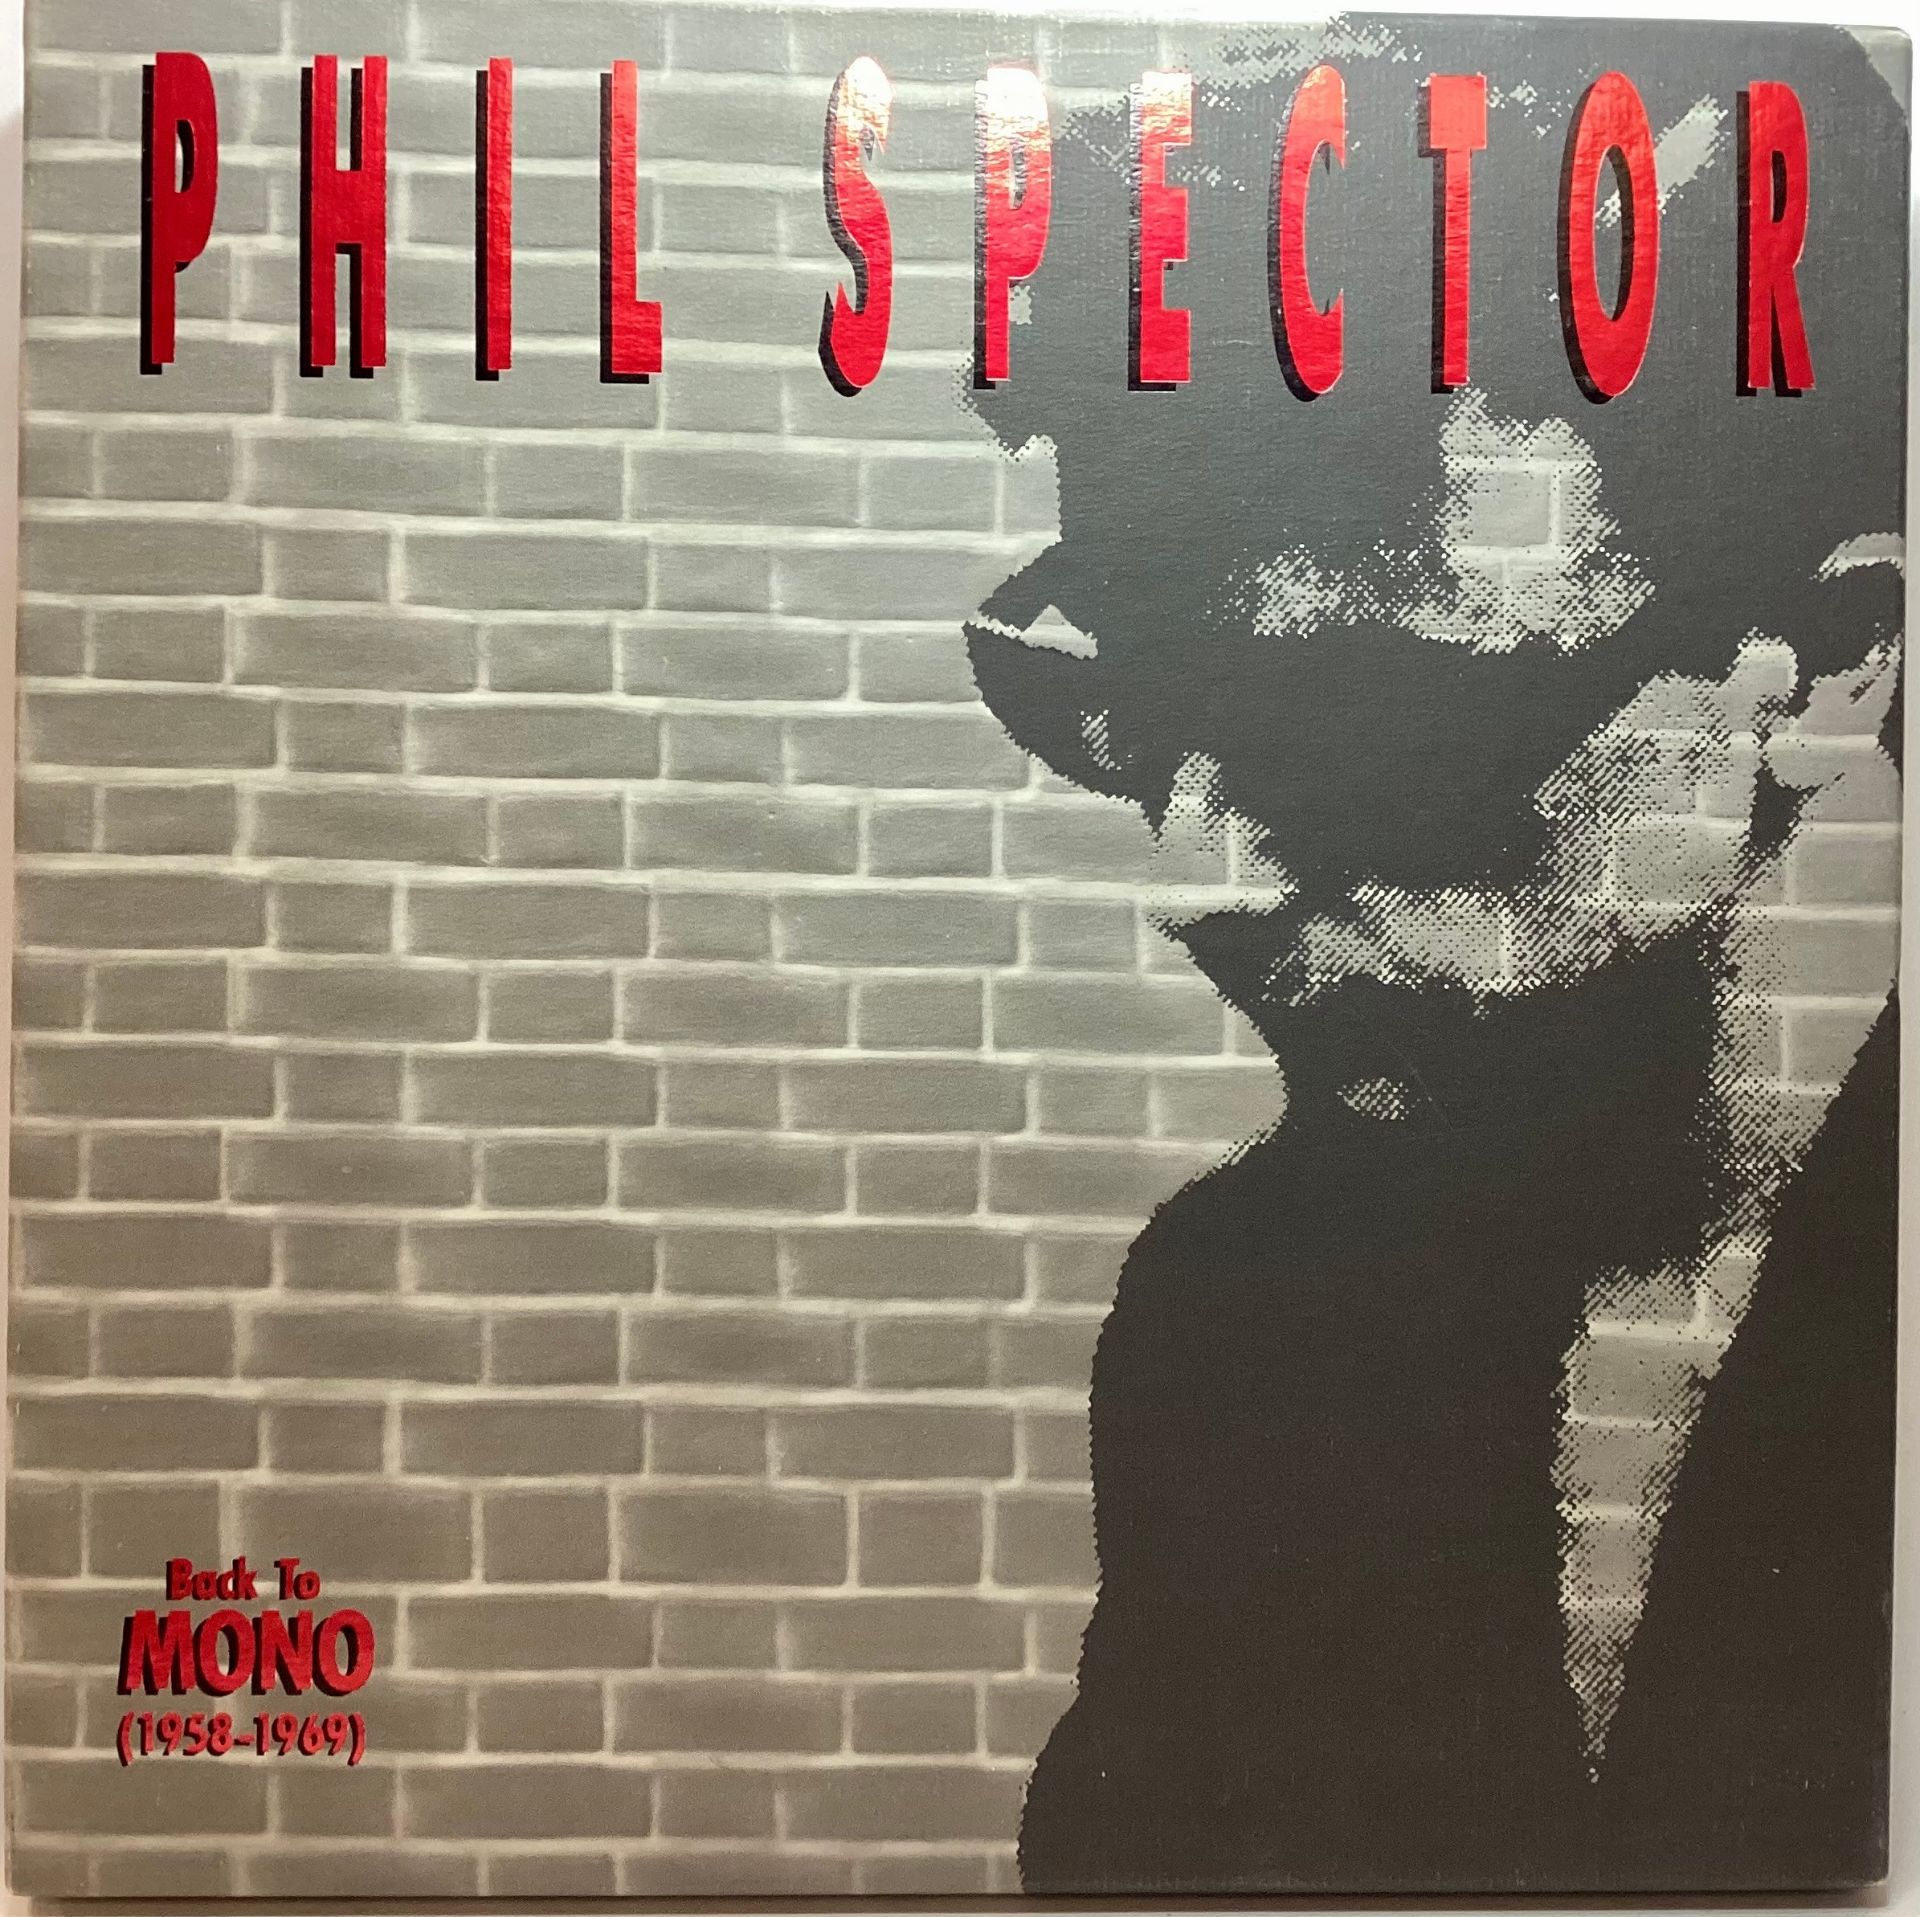 PHIL SPECTOR - BACK TO MONO (1958-1969) 5LP BOX SET. Phil Spector: Back To Mono 1958-1969 is a